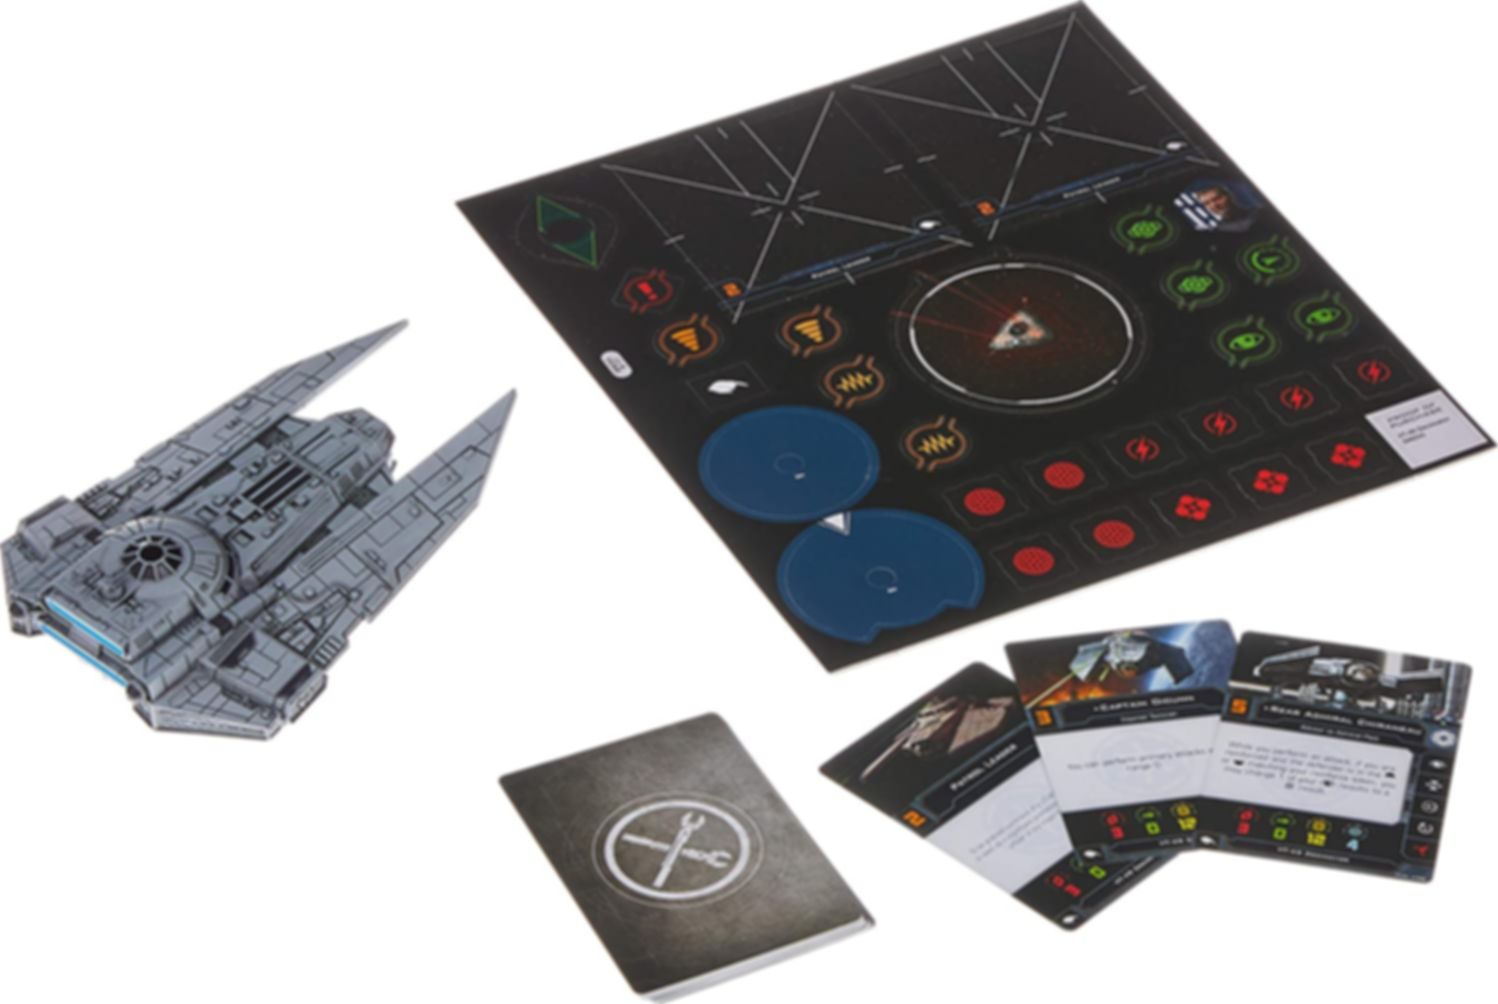 Star Wars: X-Wing (Second Edition) - VT-49 Decimator Expansion Pack partes